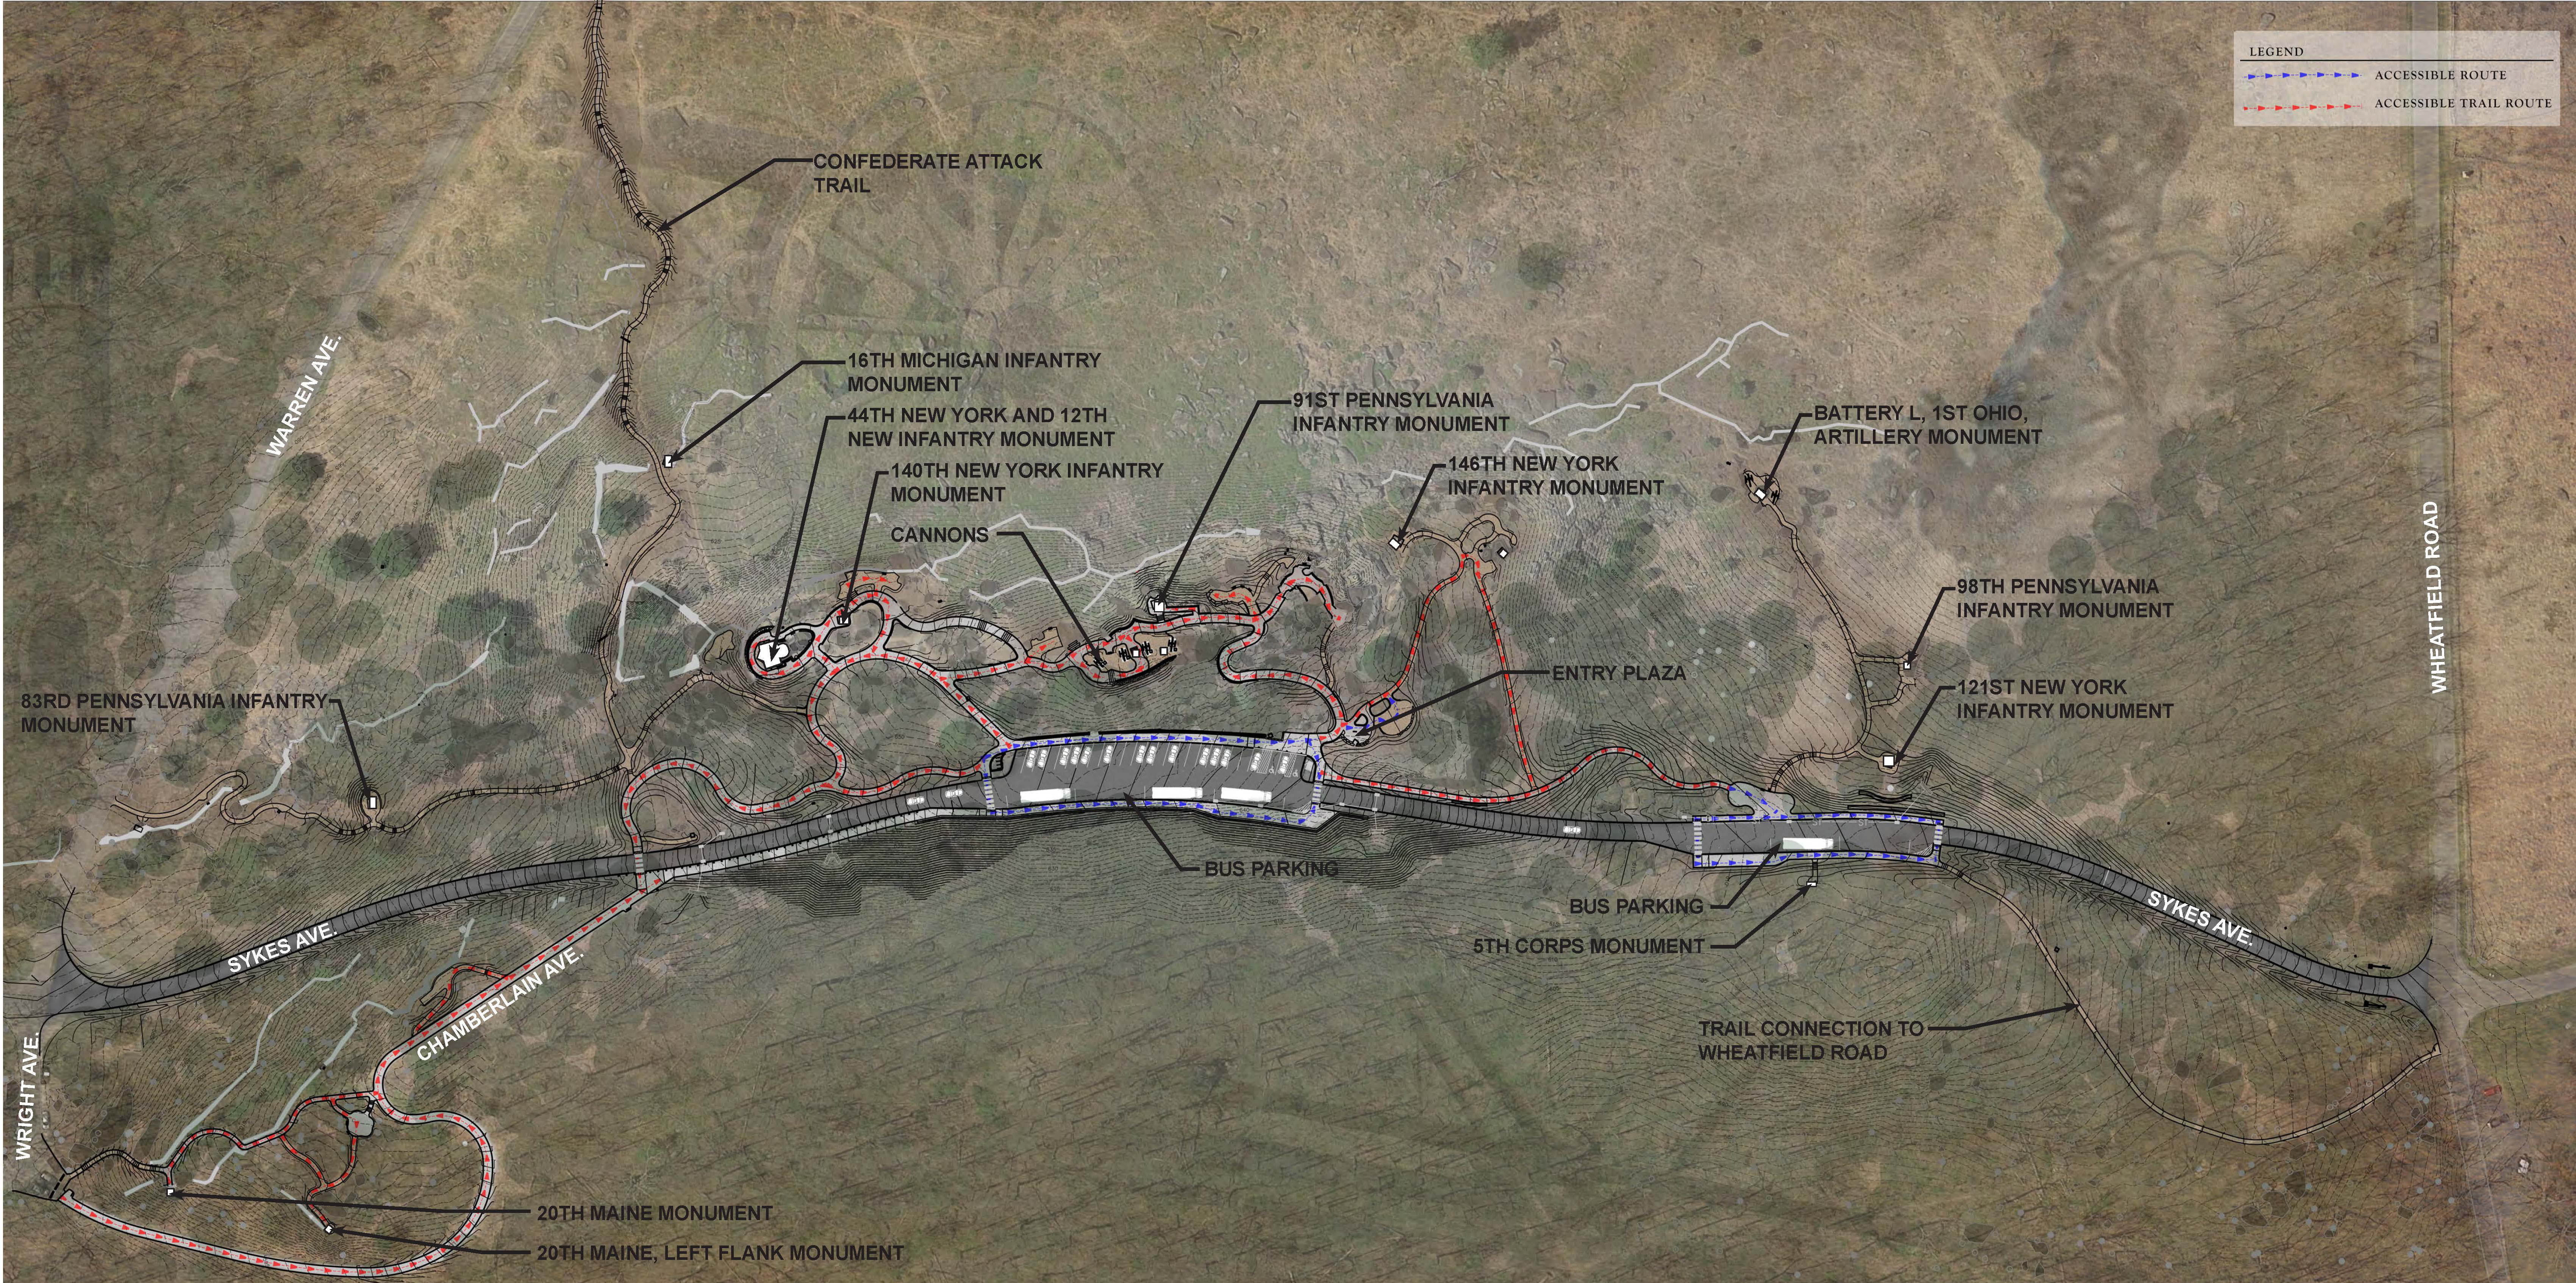 An artistic rendition of the Little Round Top rehabilitation project. Roads and trails are shown in grey, vehicles and monuments are shown in white, and trees are shown in green.